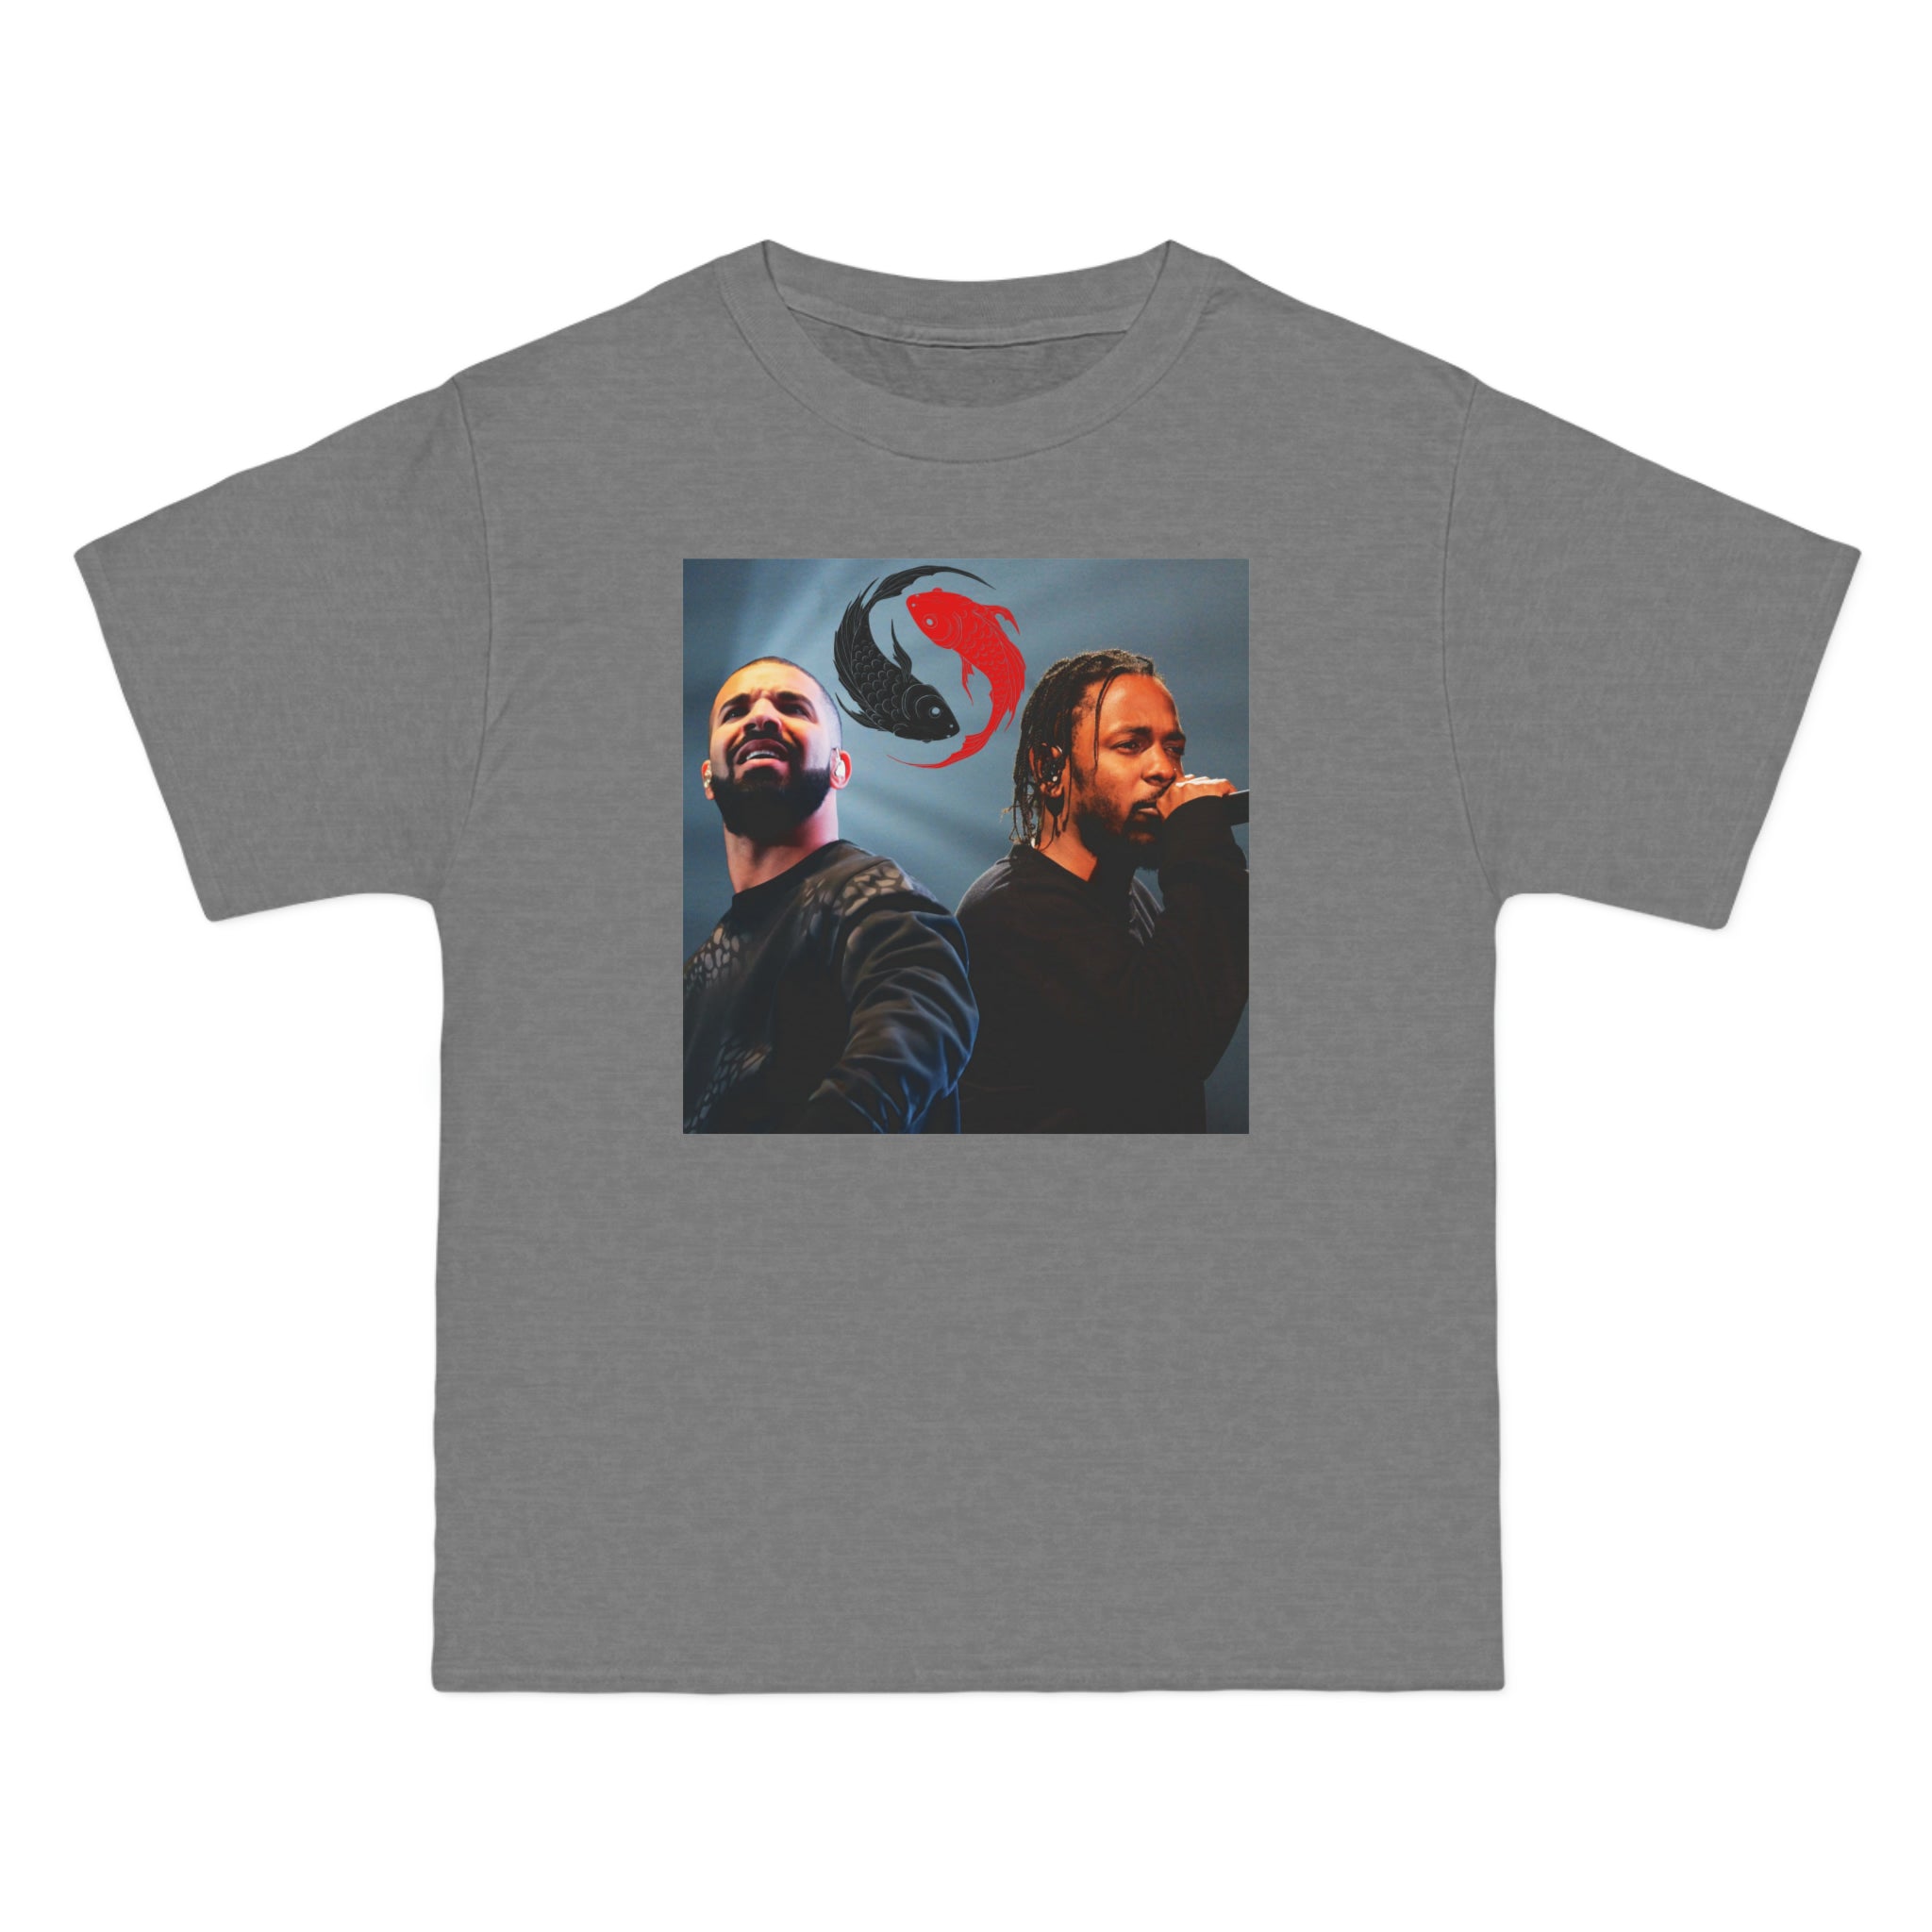 The image showcases a stylish, black Beefy-T® short-sleeve t-shirt adorned with a unique Yin and Yang design, artistically merging the iconic profiles of Drizzy and Lamar. The symbol not only represents balance and duality but also celebrates the rap beef rivalry turned mutual admiration, making it a profound statement piece for any fan of the genre.